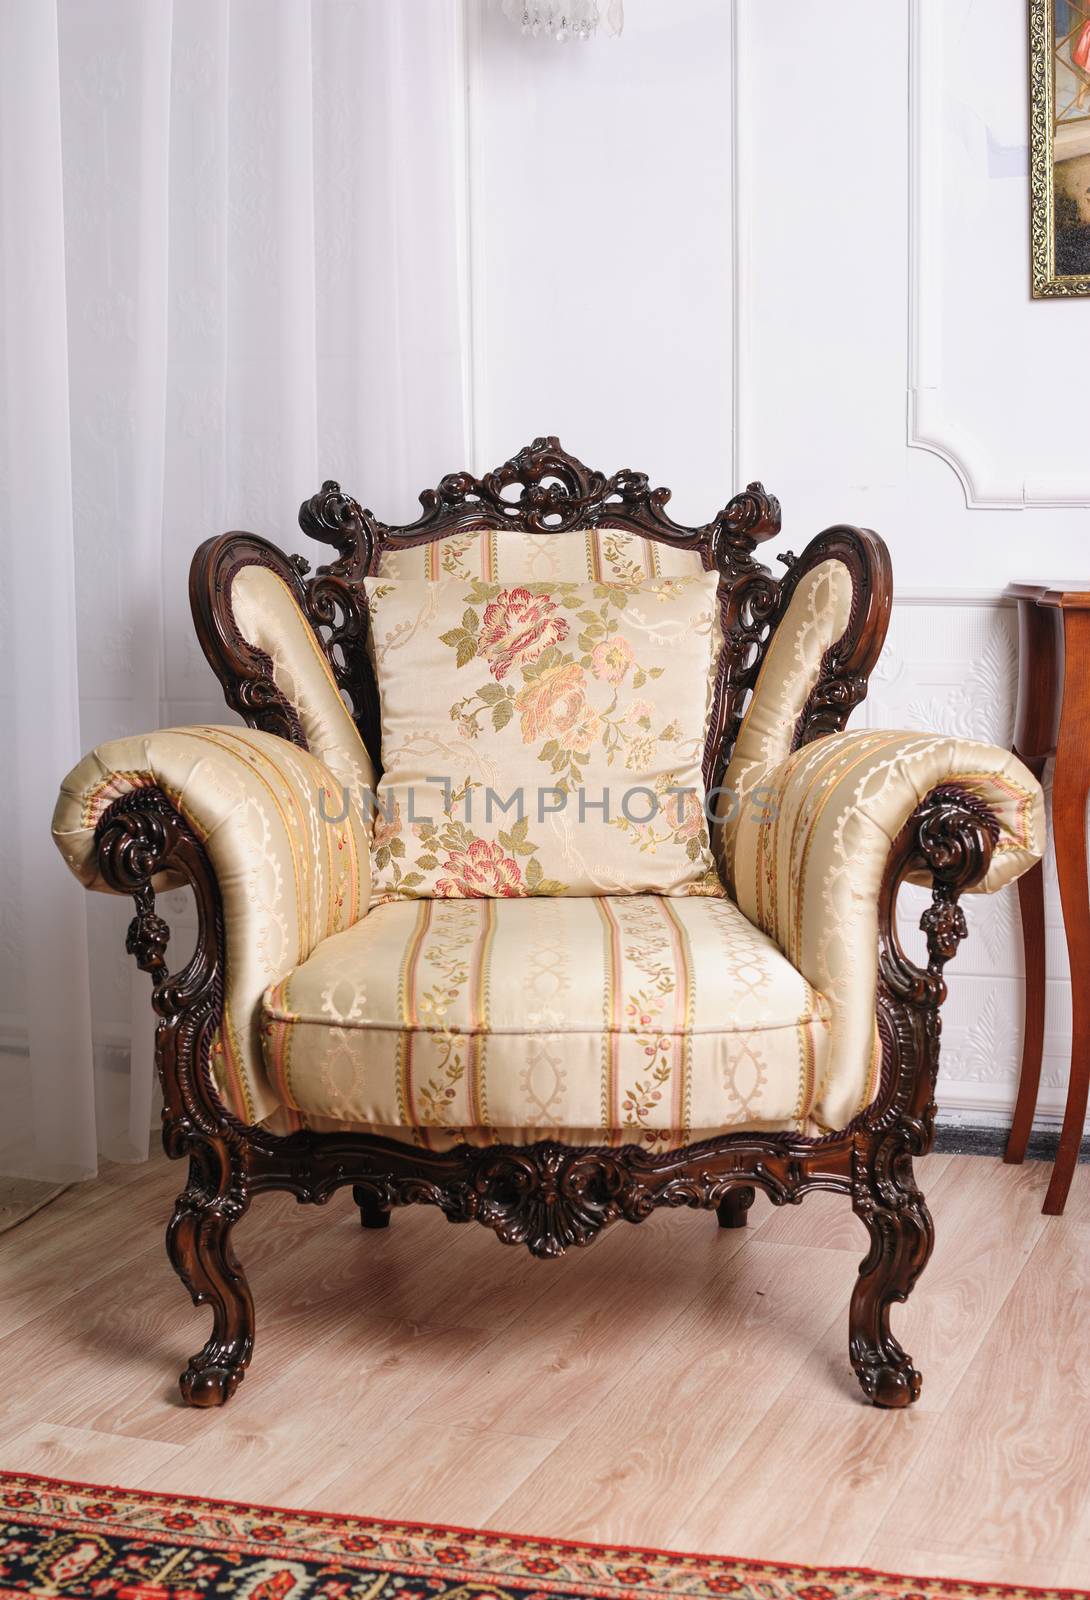 Luxury wooden antique chair in the room by timonko